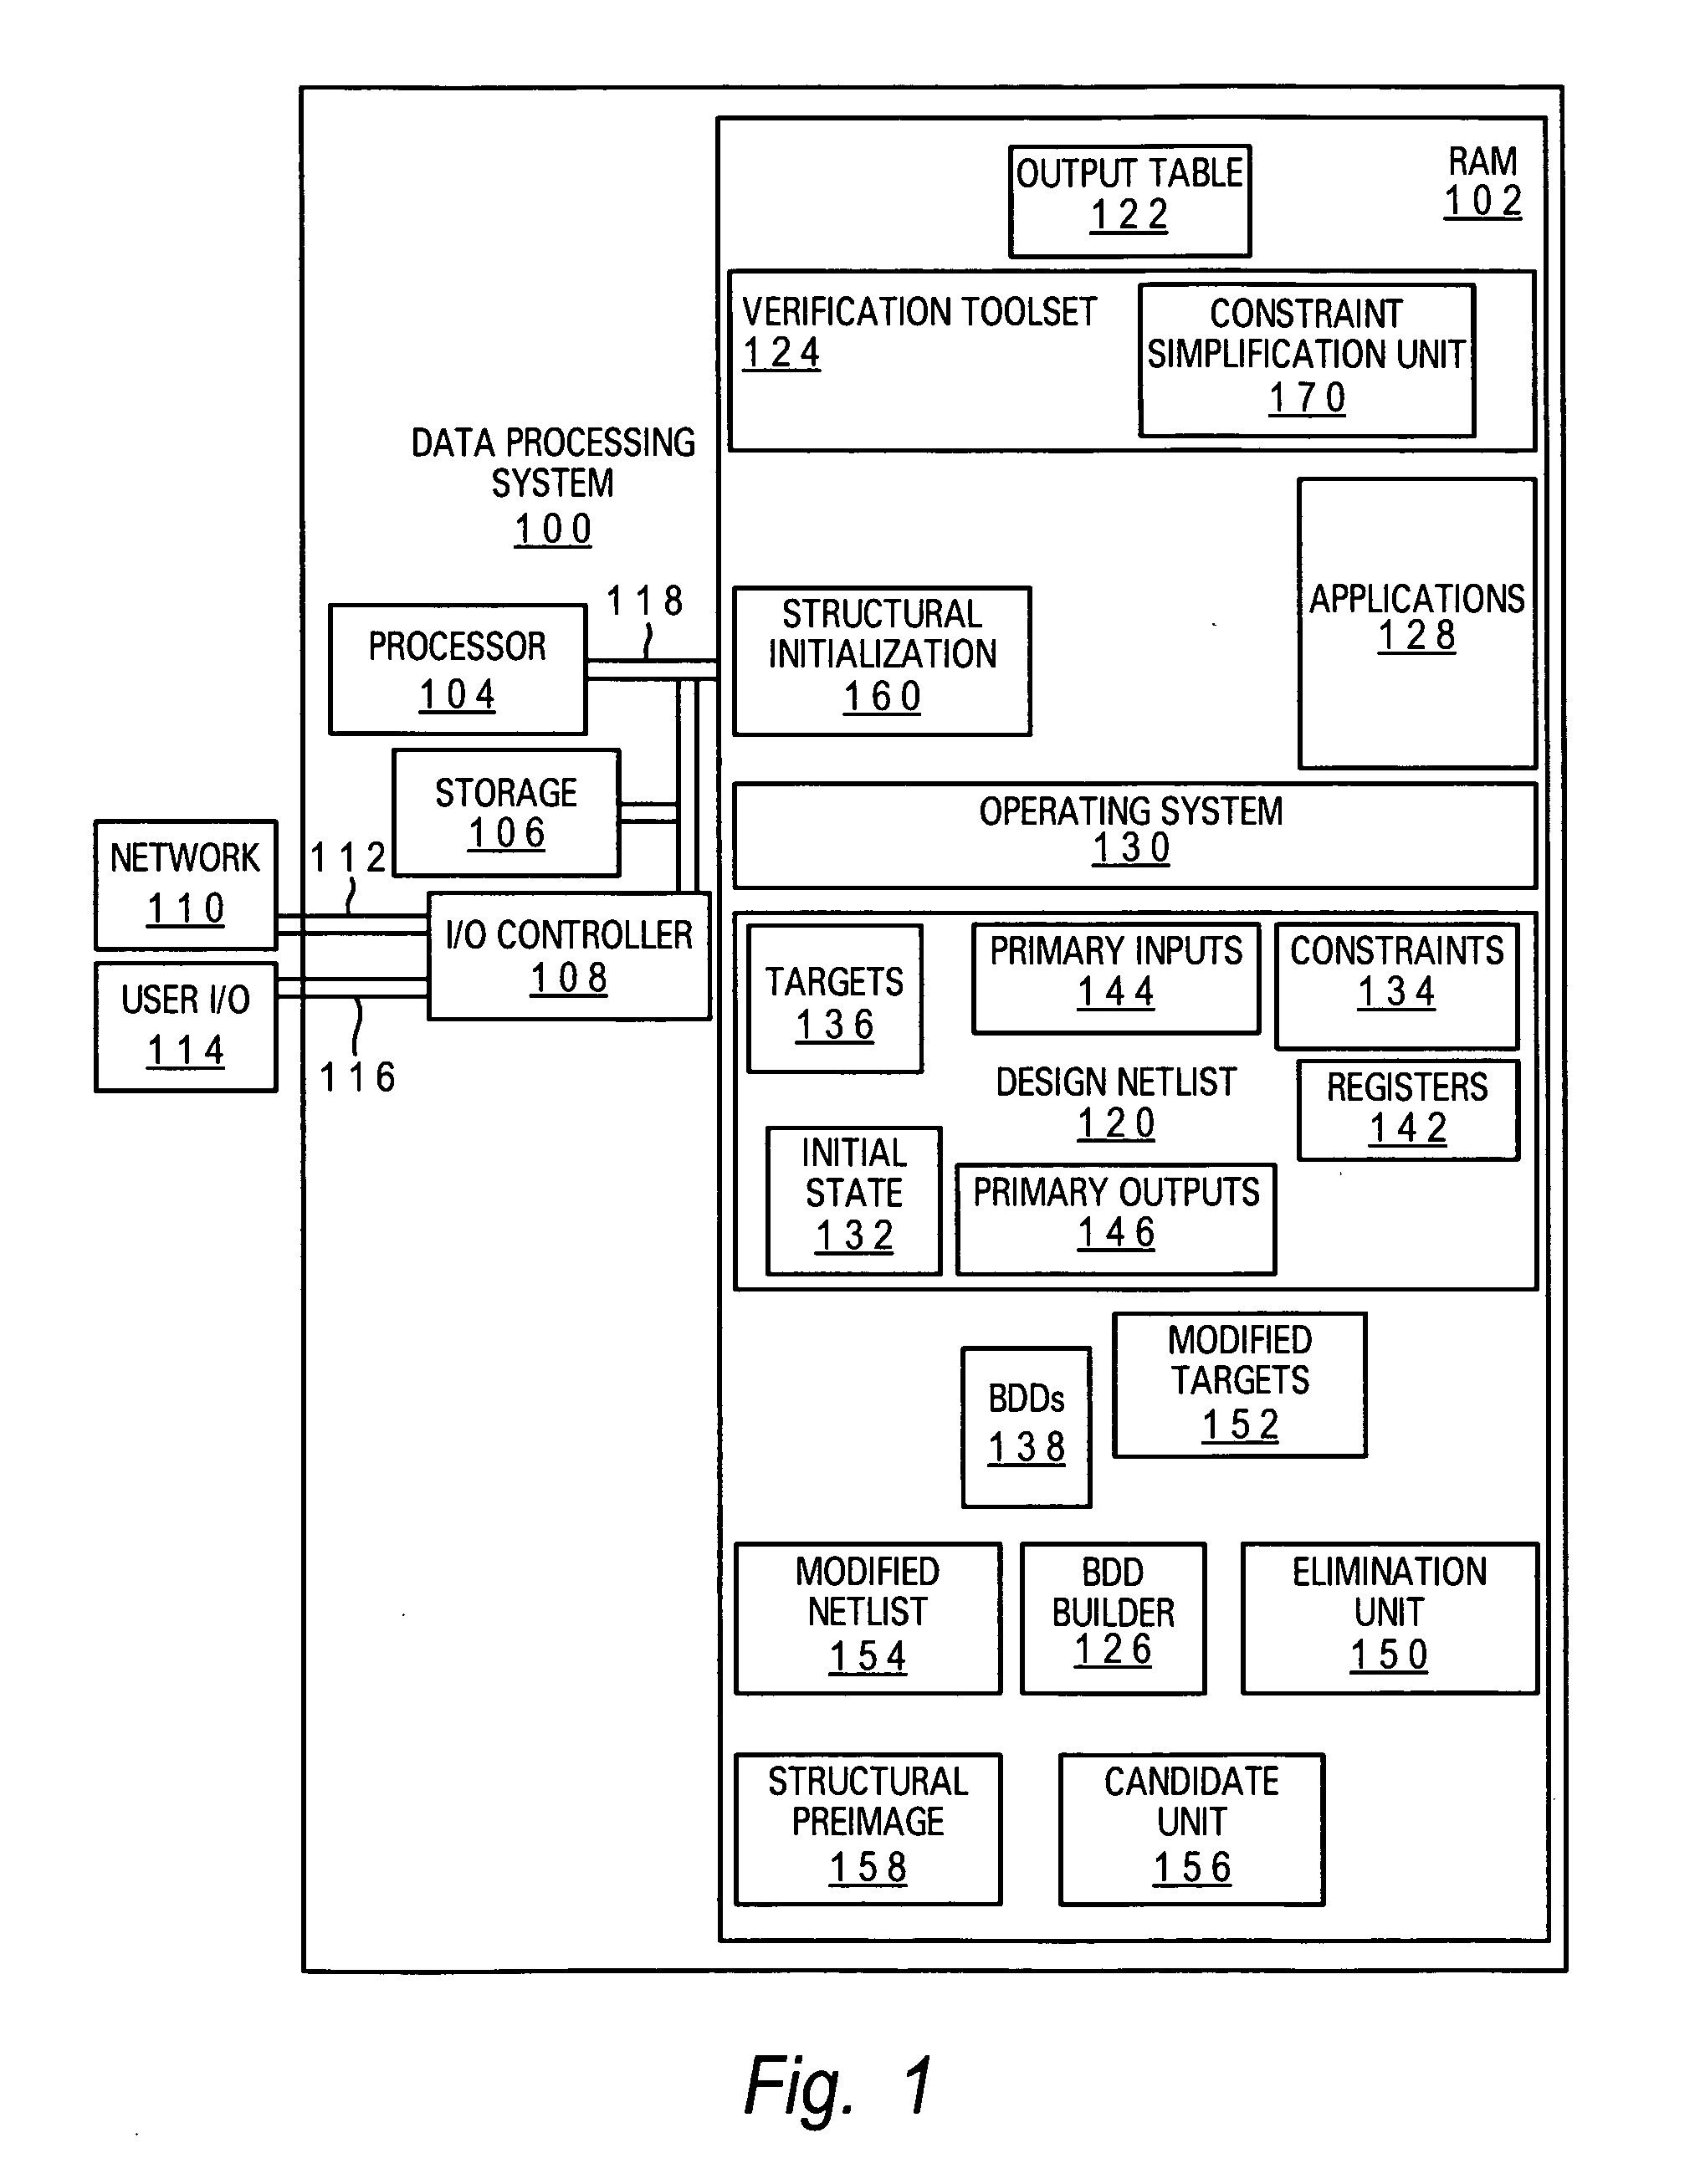 Method and system for performing heuristic constraint simplification